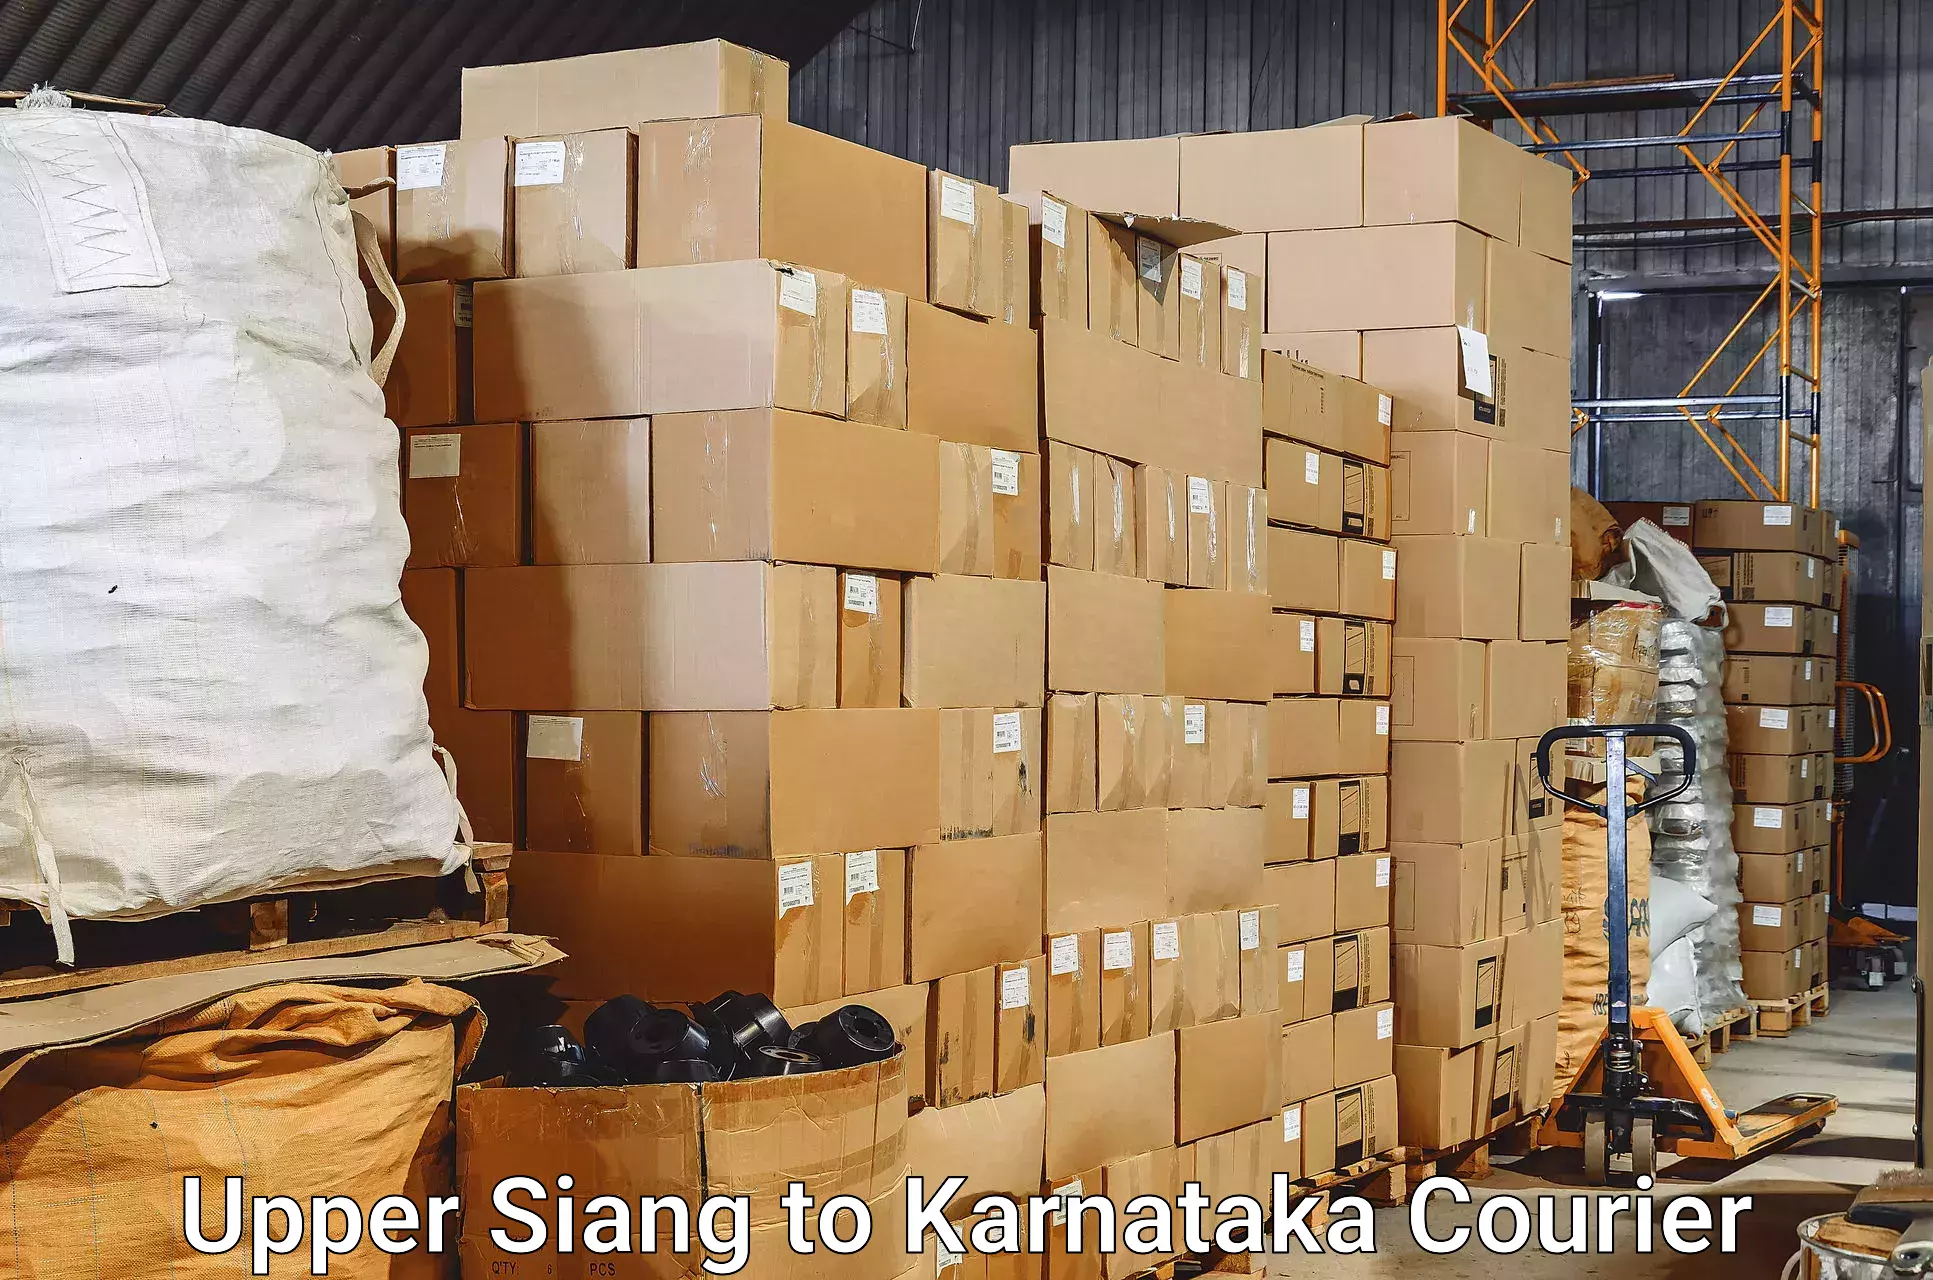 Luggage transport consultancy Upper Siang to Channapatna